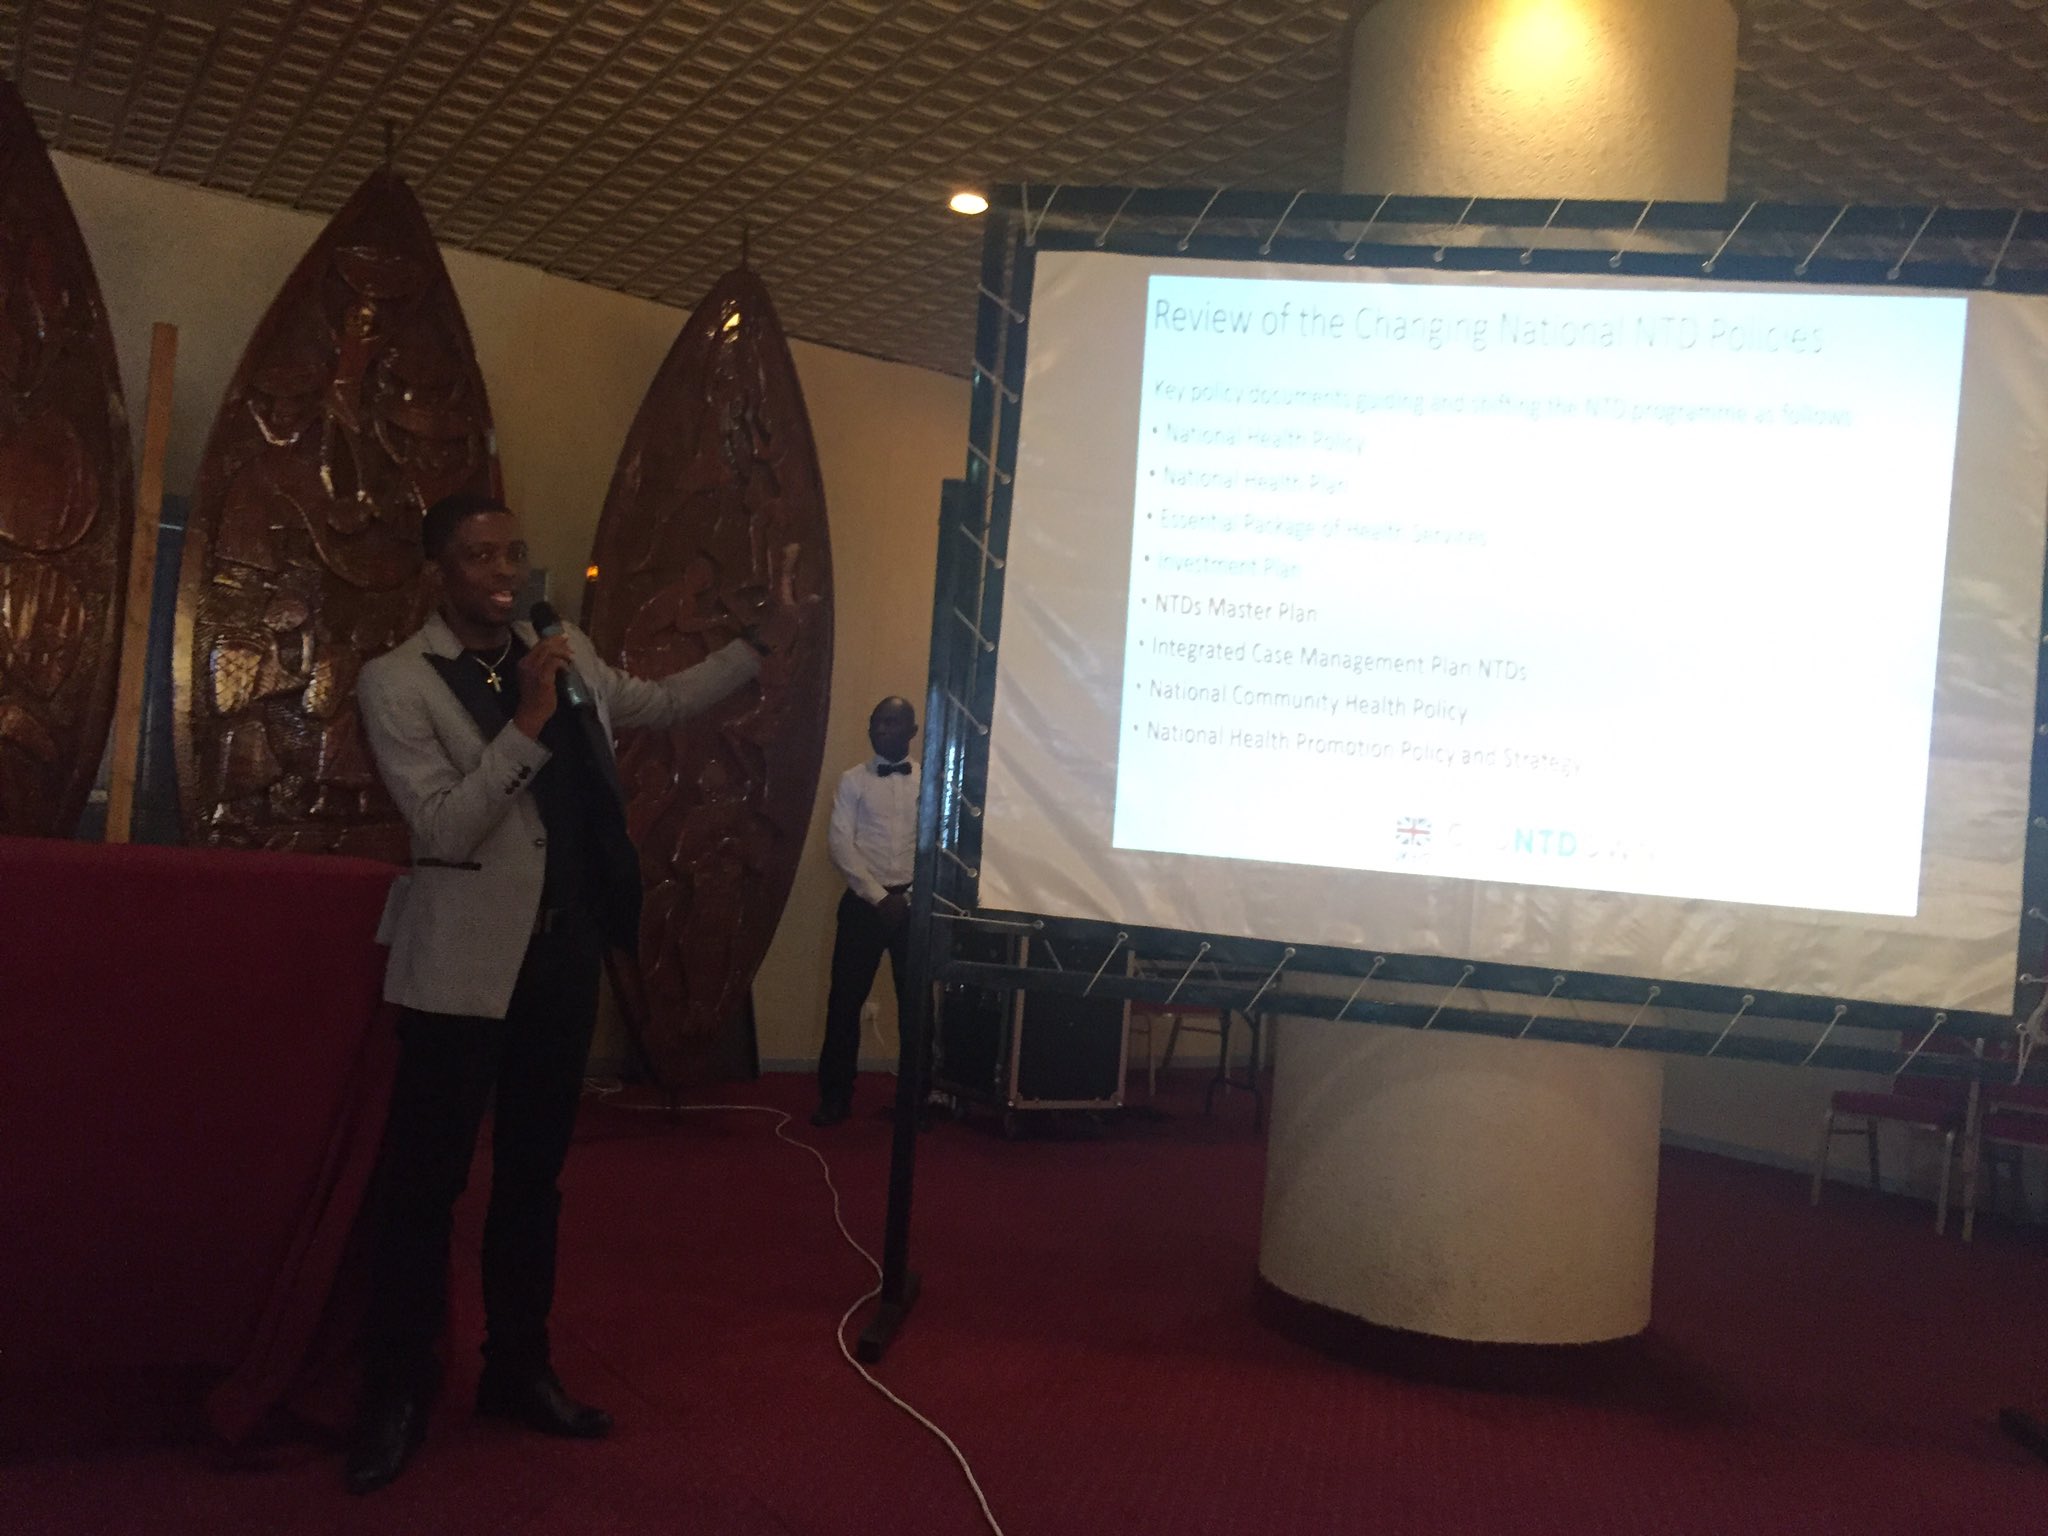 Countdownonntds Countdownlr Director Karsor Kollie Highlights Policy Changes In Liberia Note The Successful Roll Out Of Its Ntd Case Management Plan T Co 4vud5vhcby Twitter